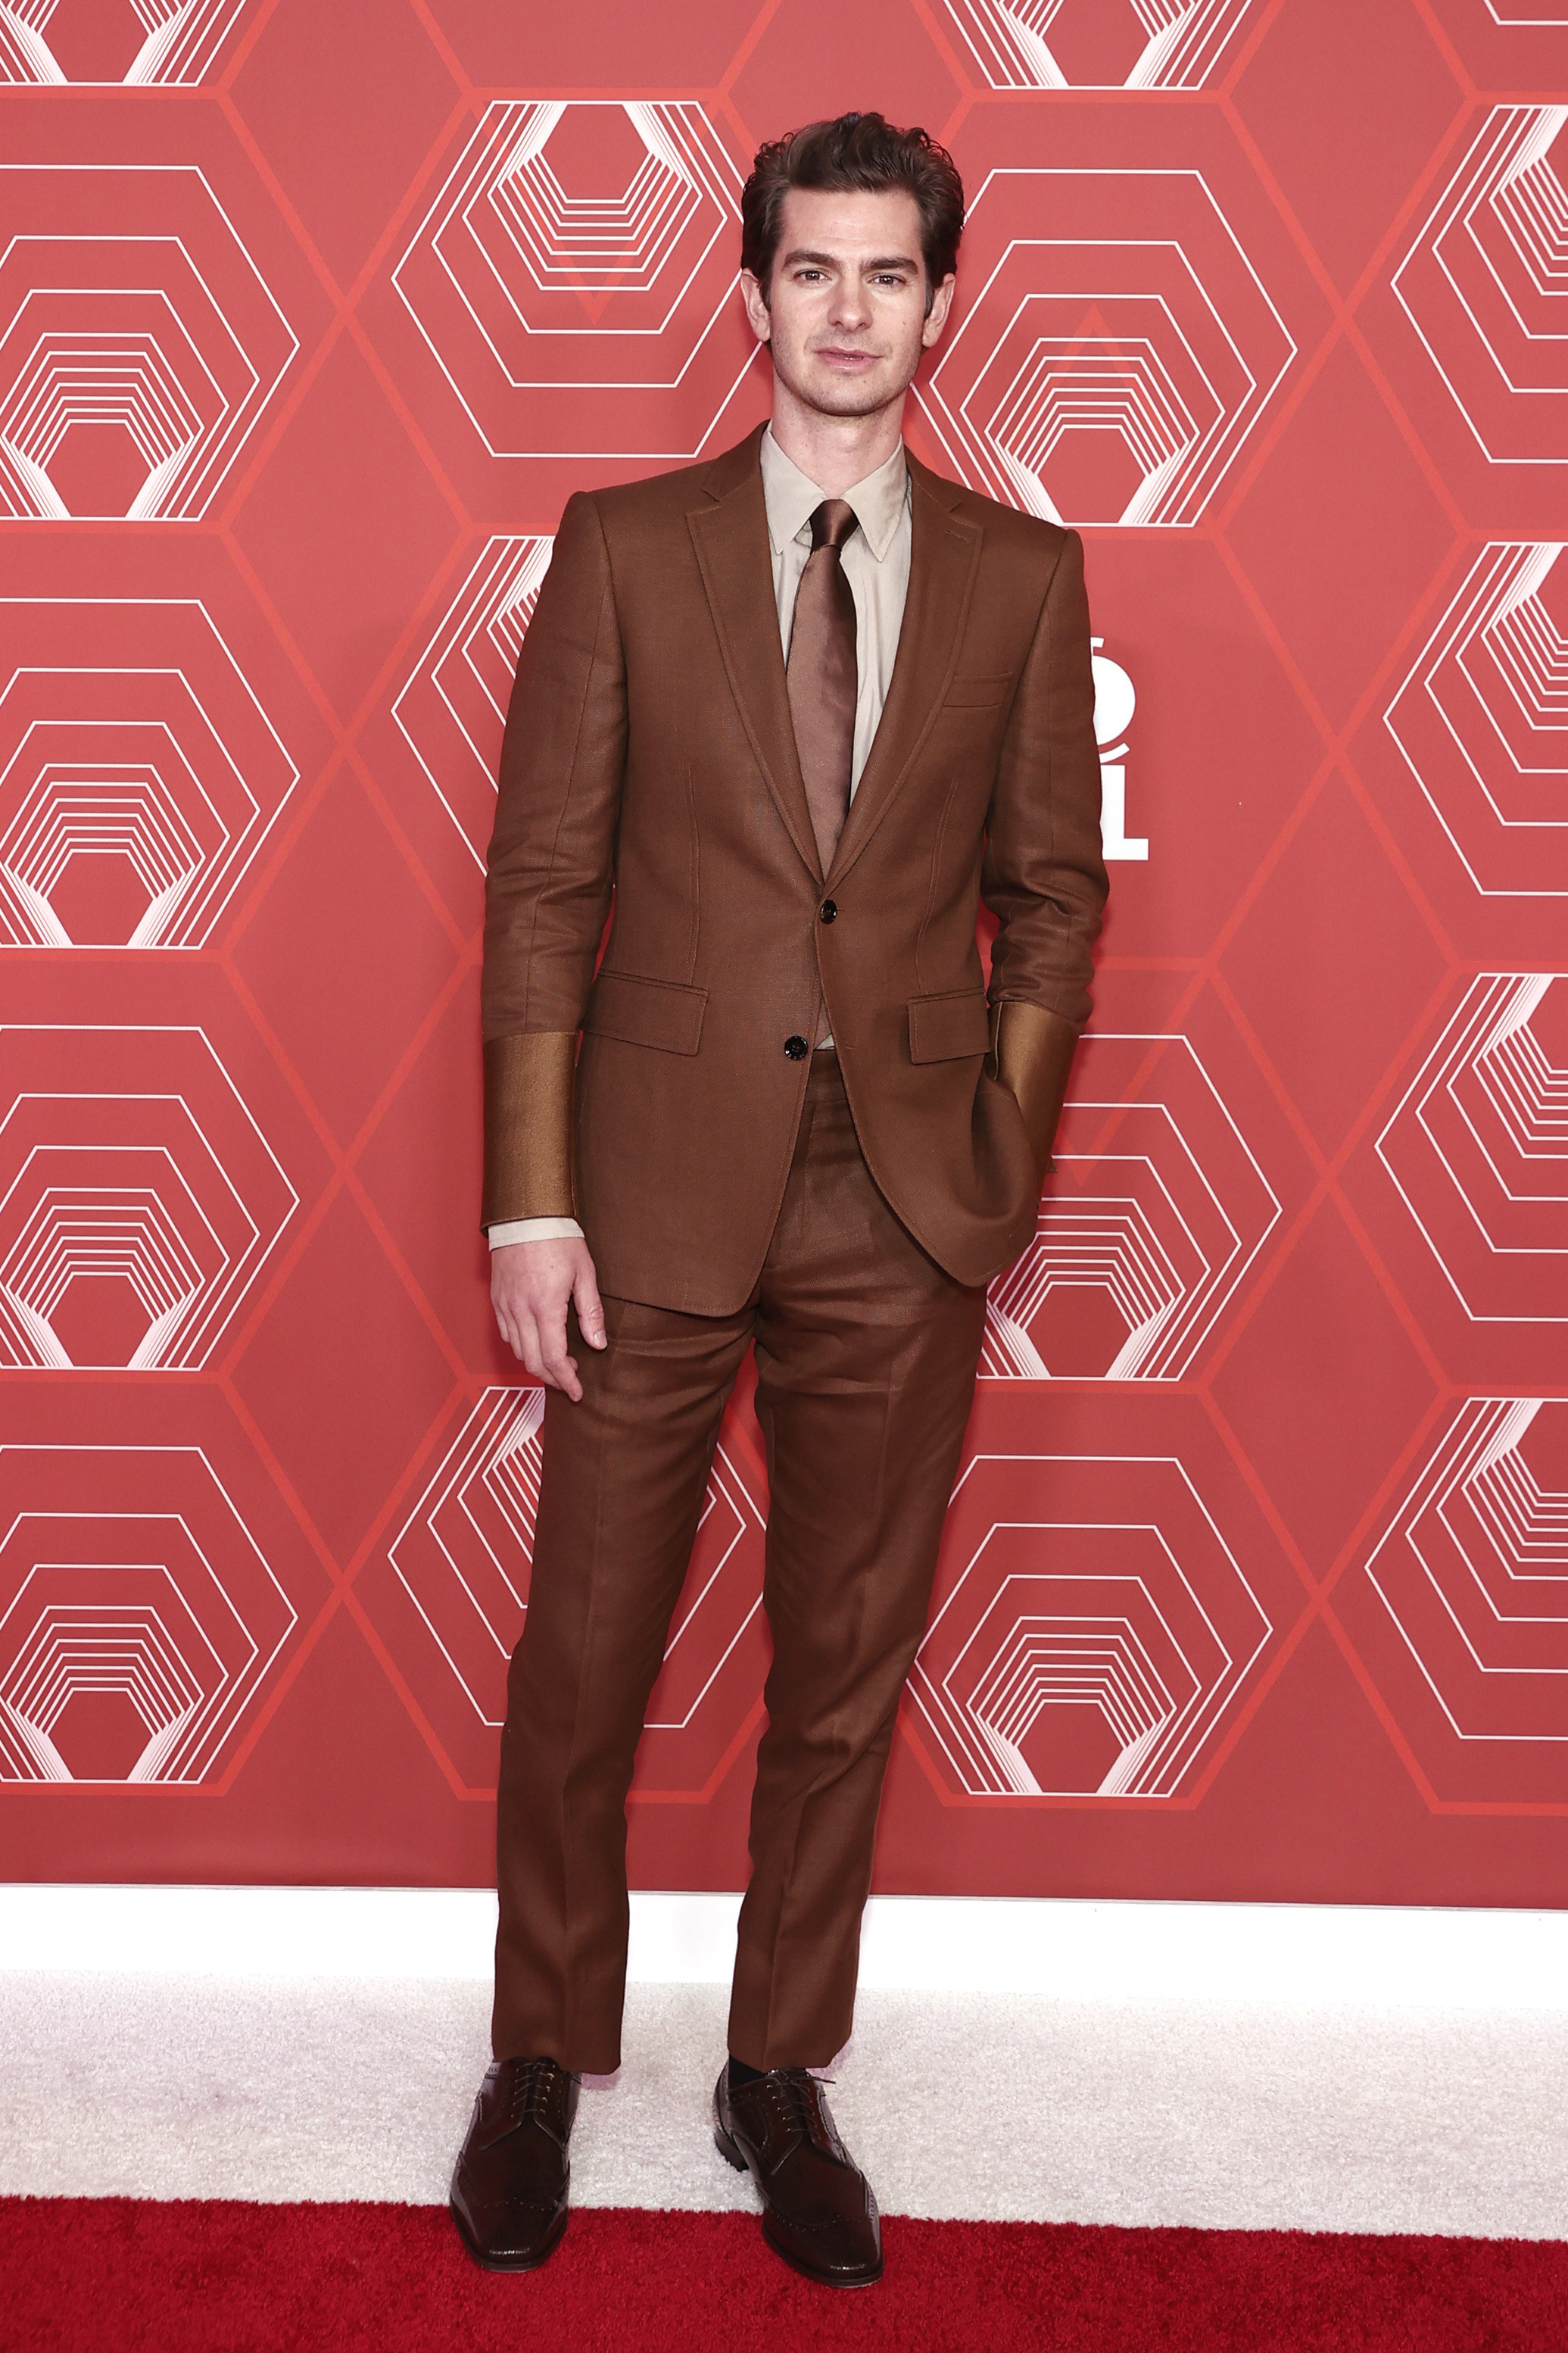 Andrew wears a brown suit with silk cuffs